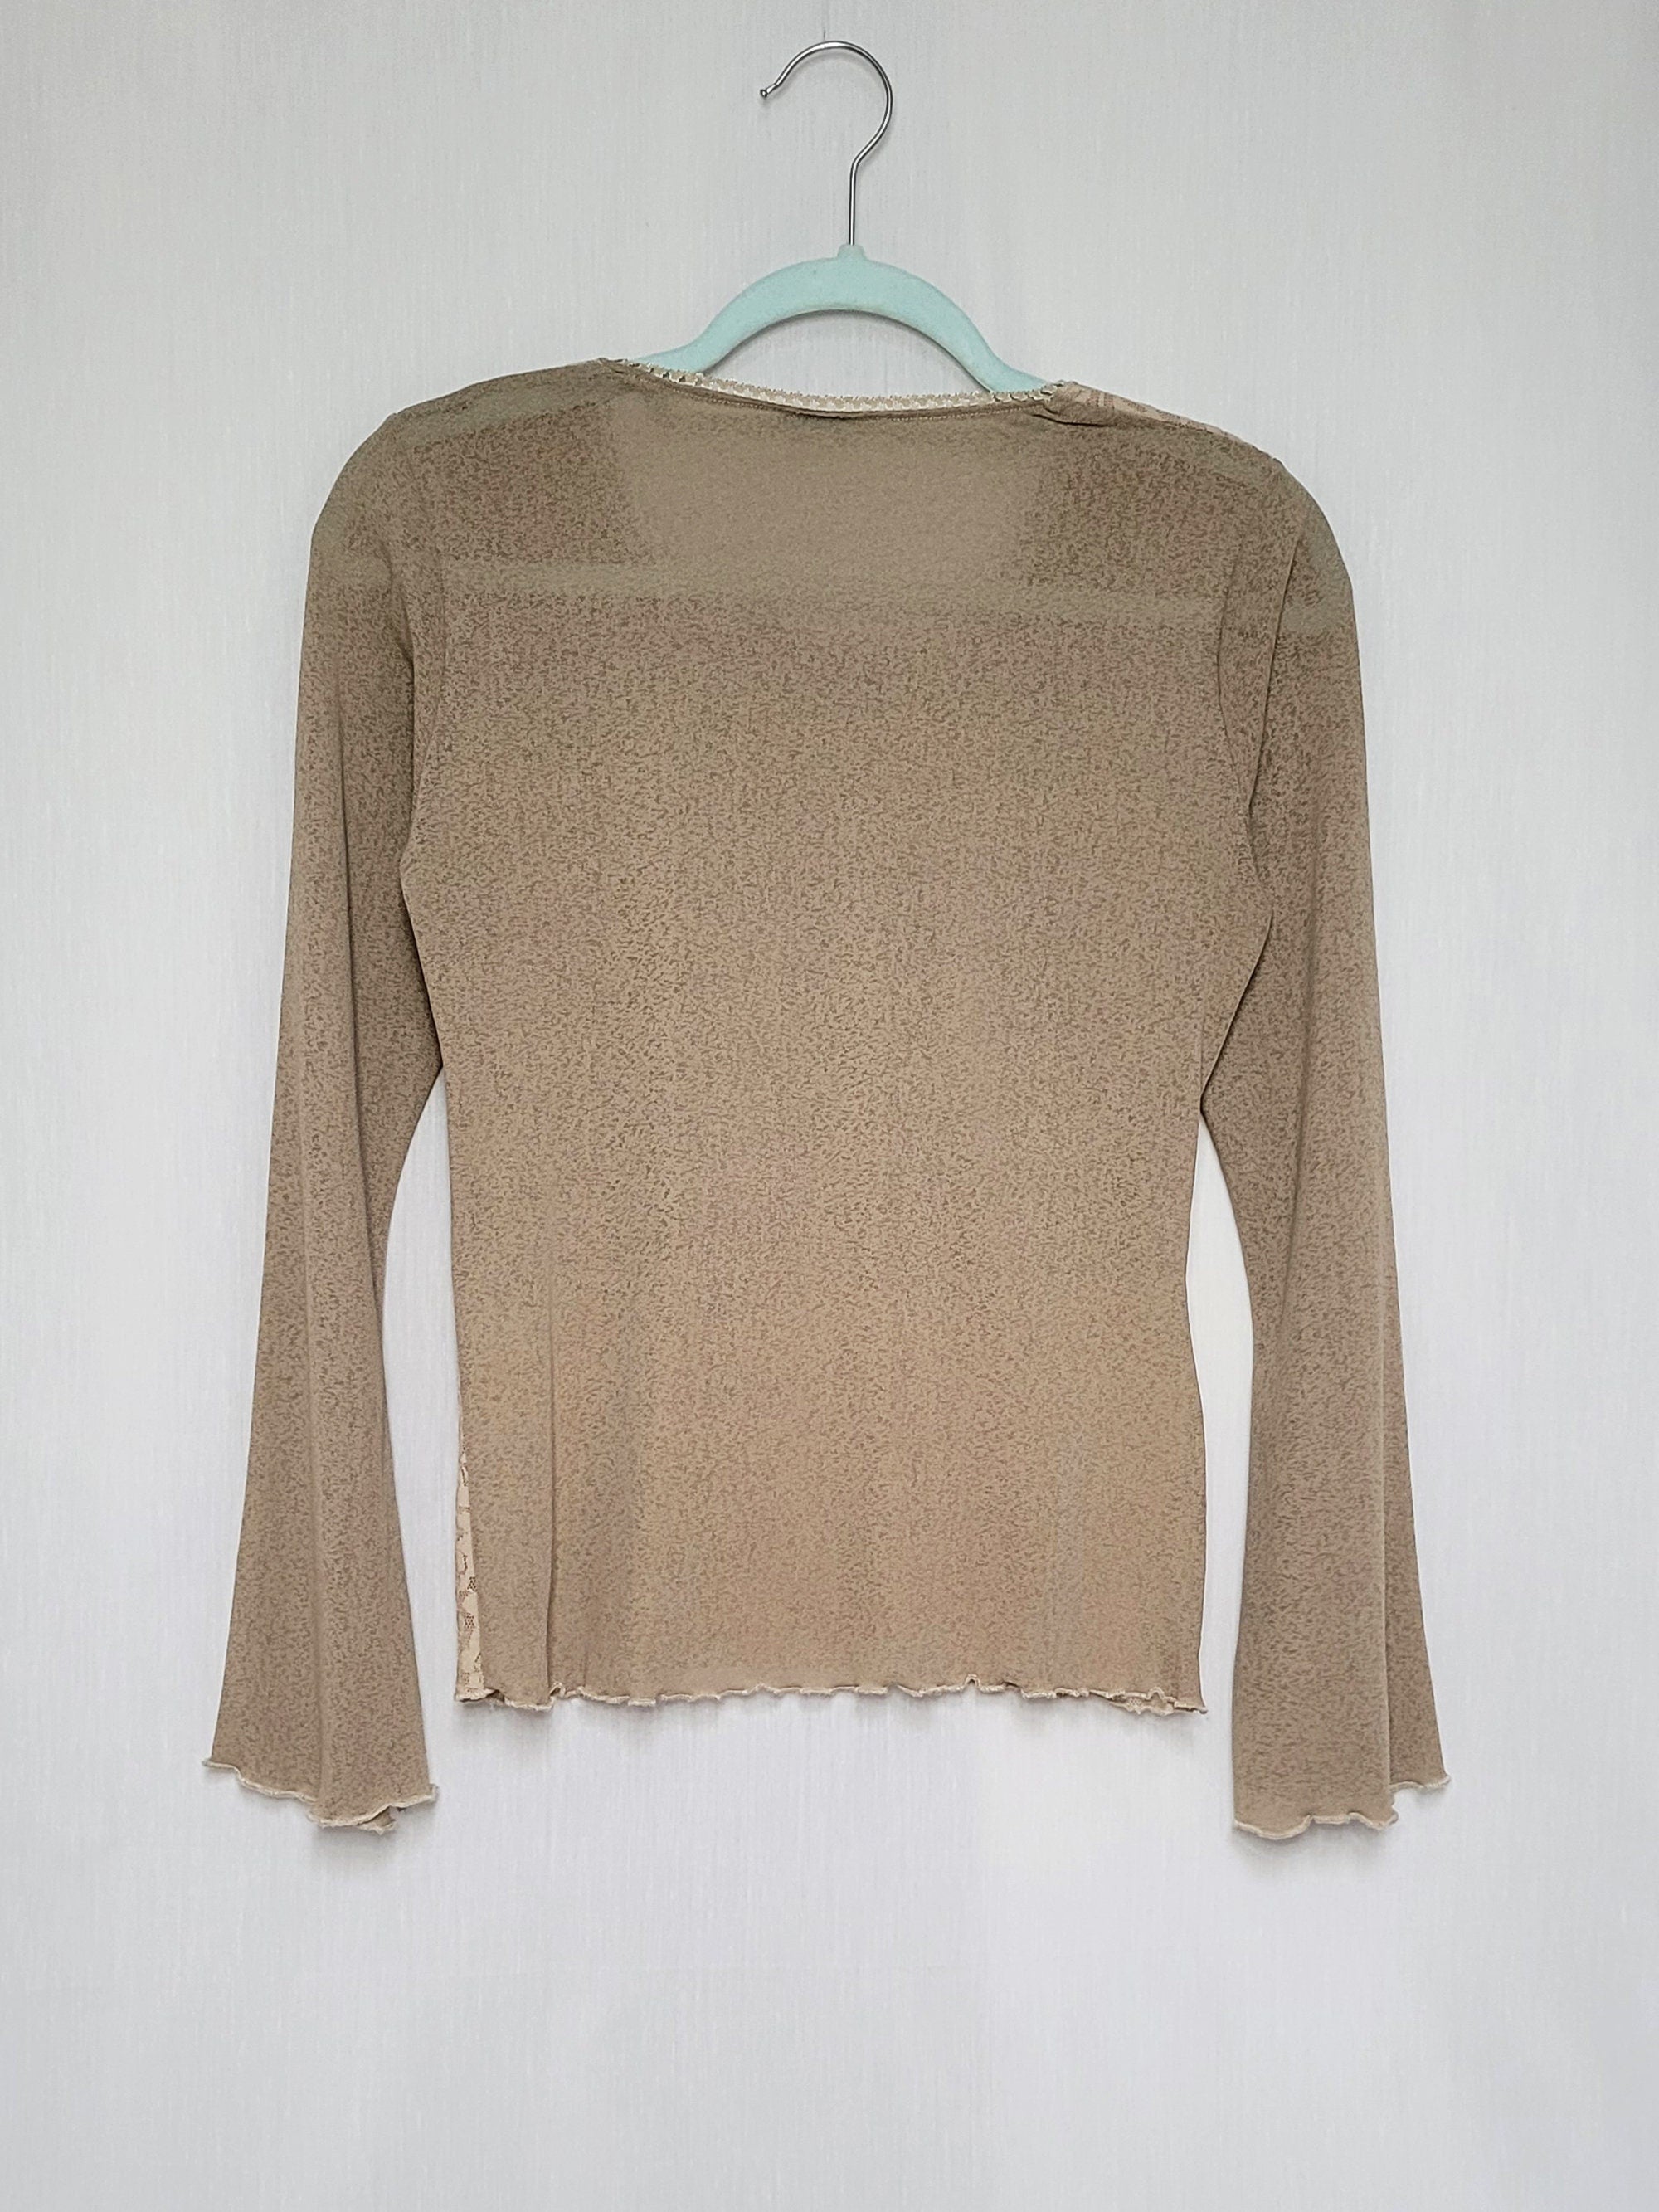 Vintage 90s beige mesh lace flare sleeve top blouse